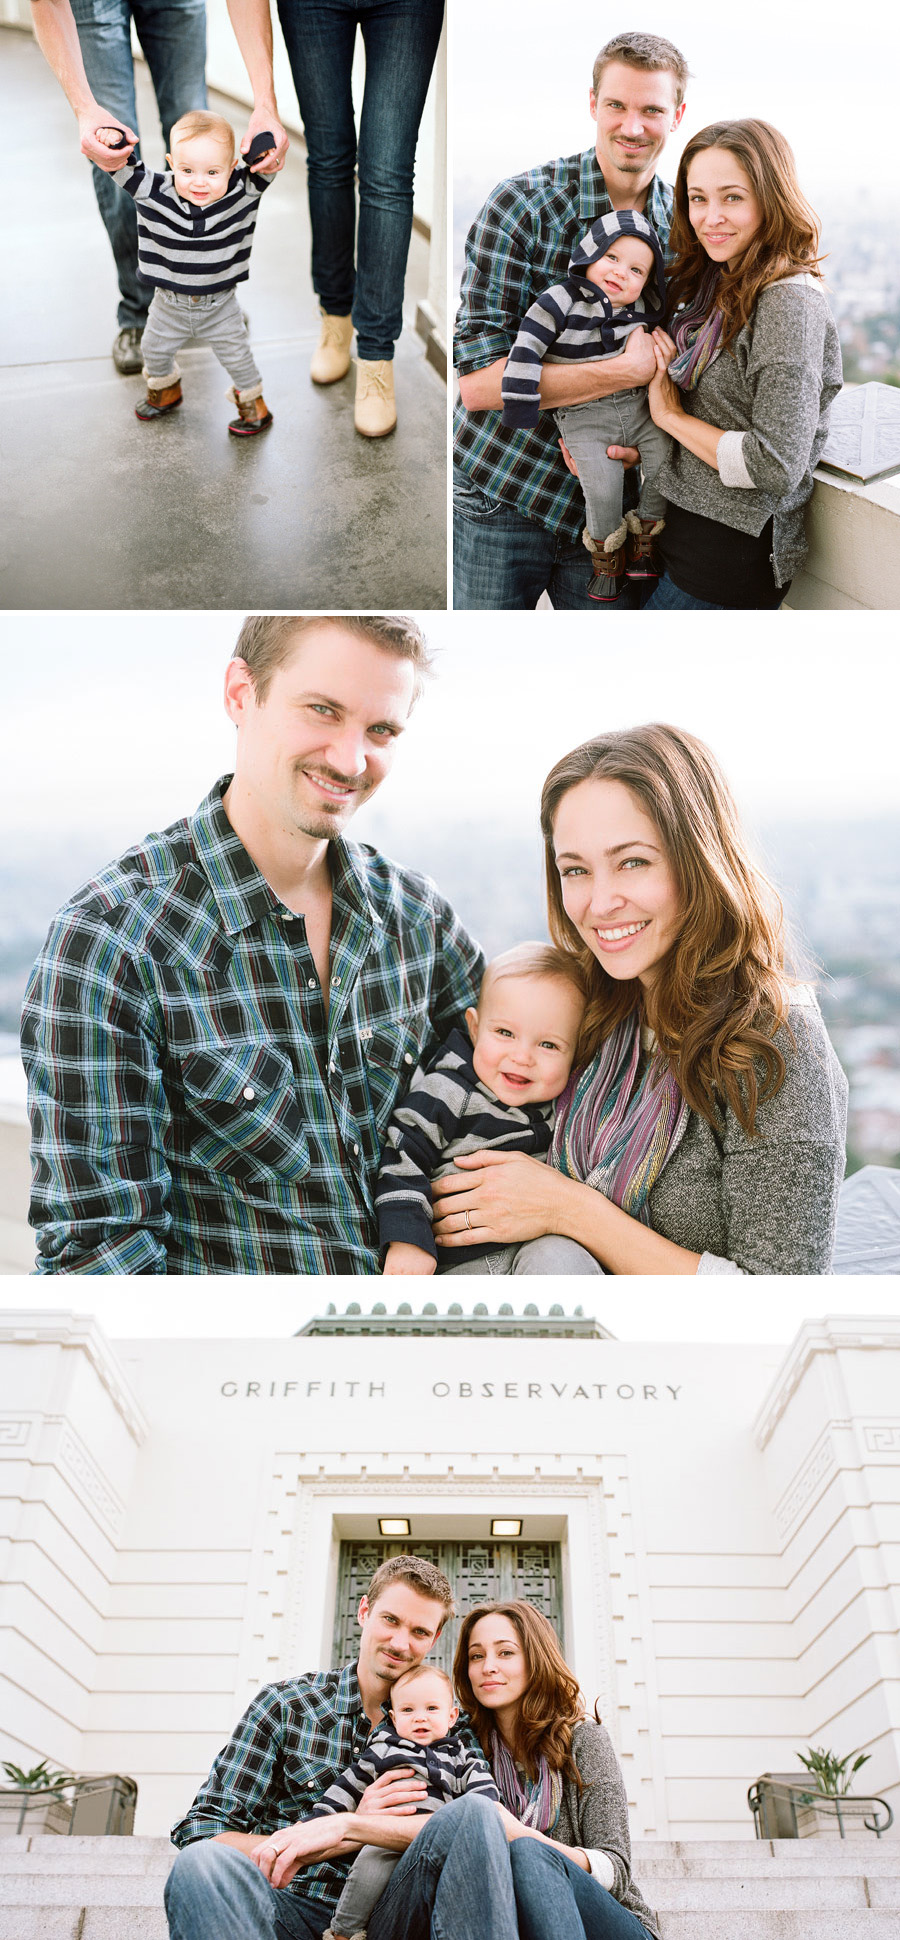 Autumn Resser and Jesse Warren Family Photos at Griffith Observatory 0009